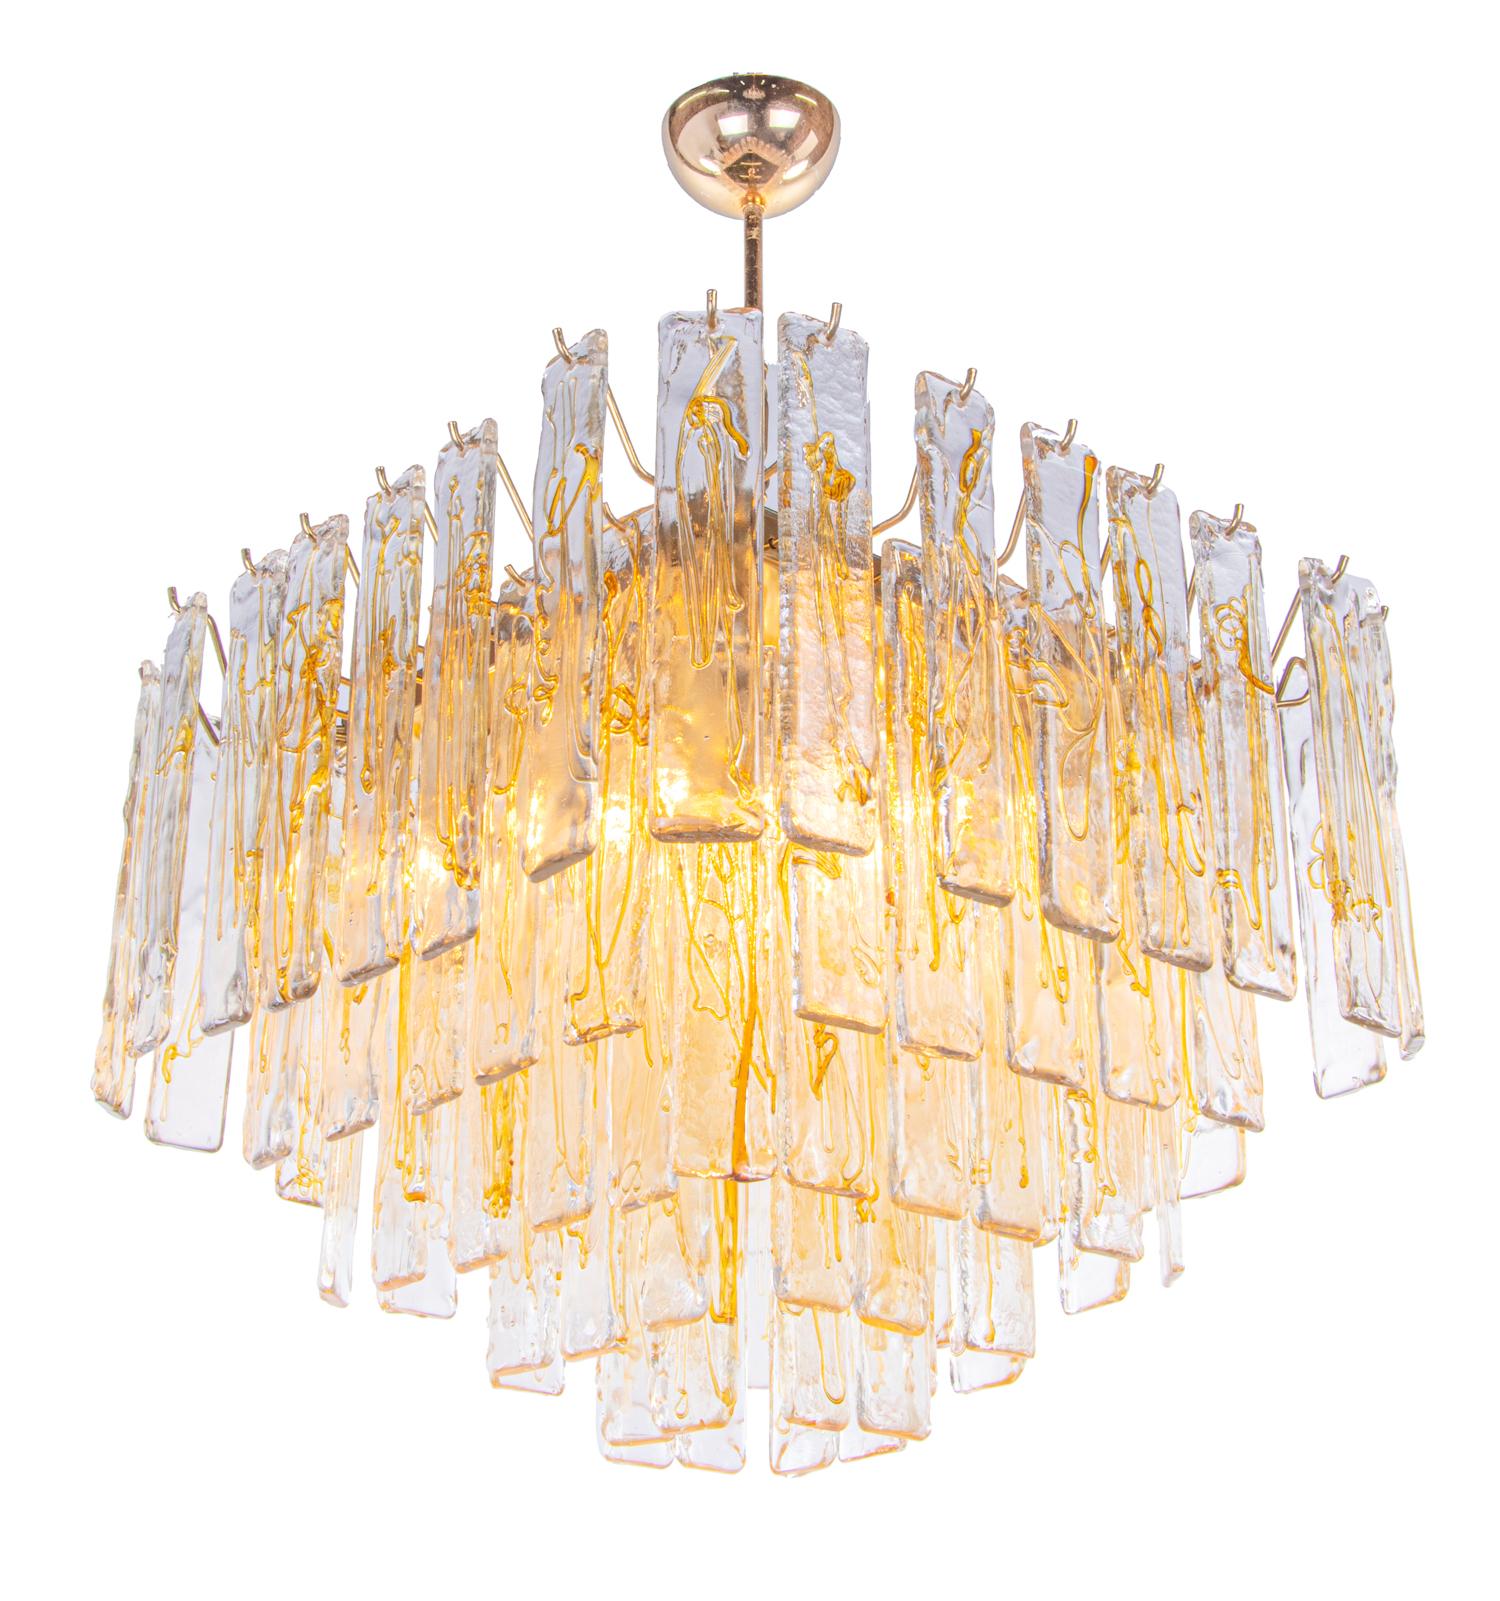 Elegant large Murano lava glass chandelier with hand blown amber textured glass panels on a gold plated brass frame. The chandelier illuminates beautifully. Gem from the time. With this light you make a clear statement in your interior design. A